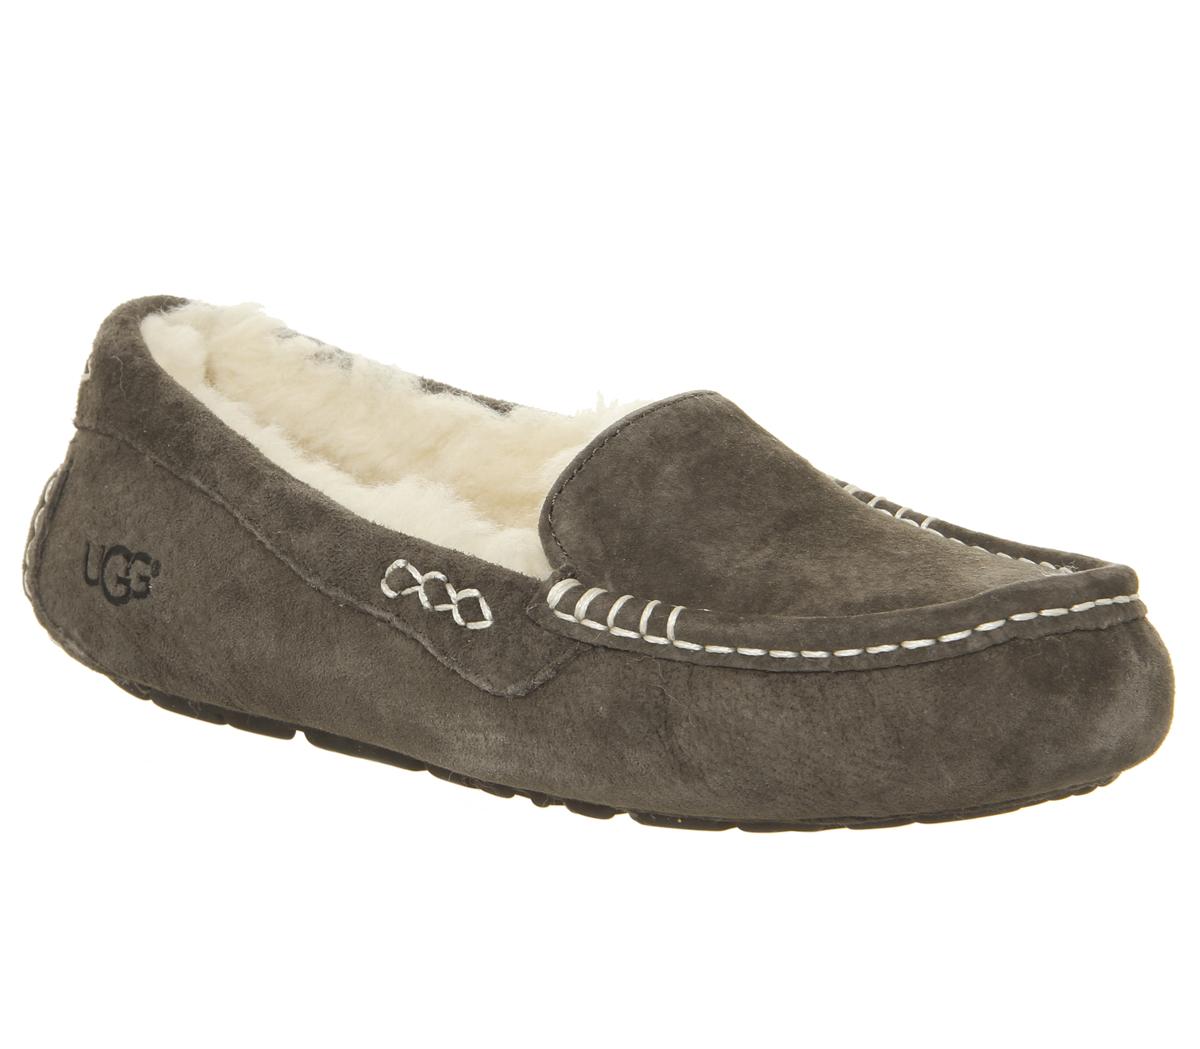 UGG Ansley Slippers Chocolate Suede - Office Girl